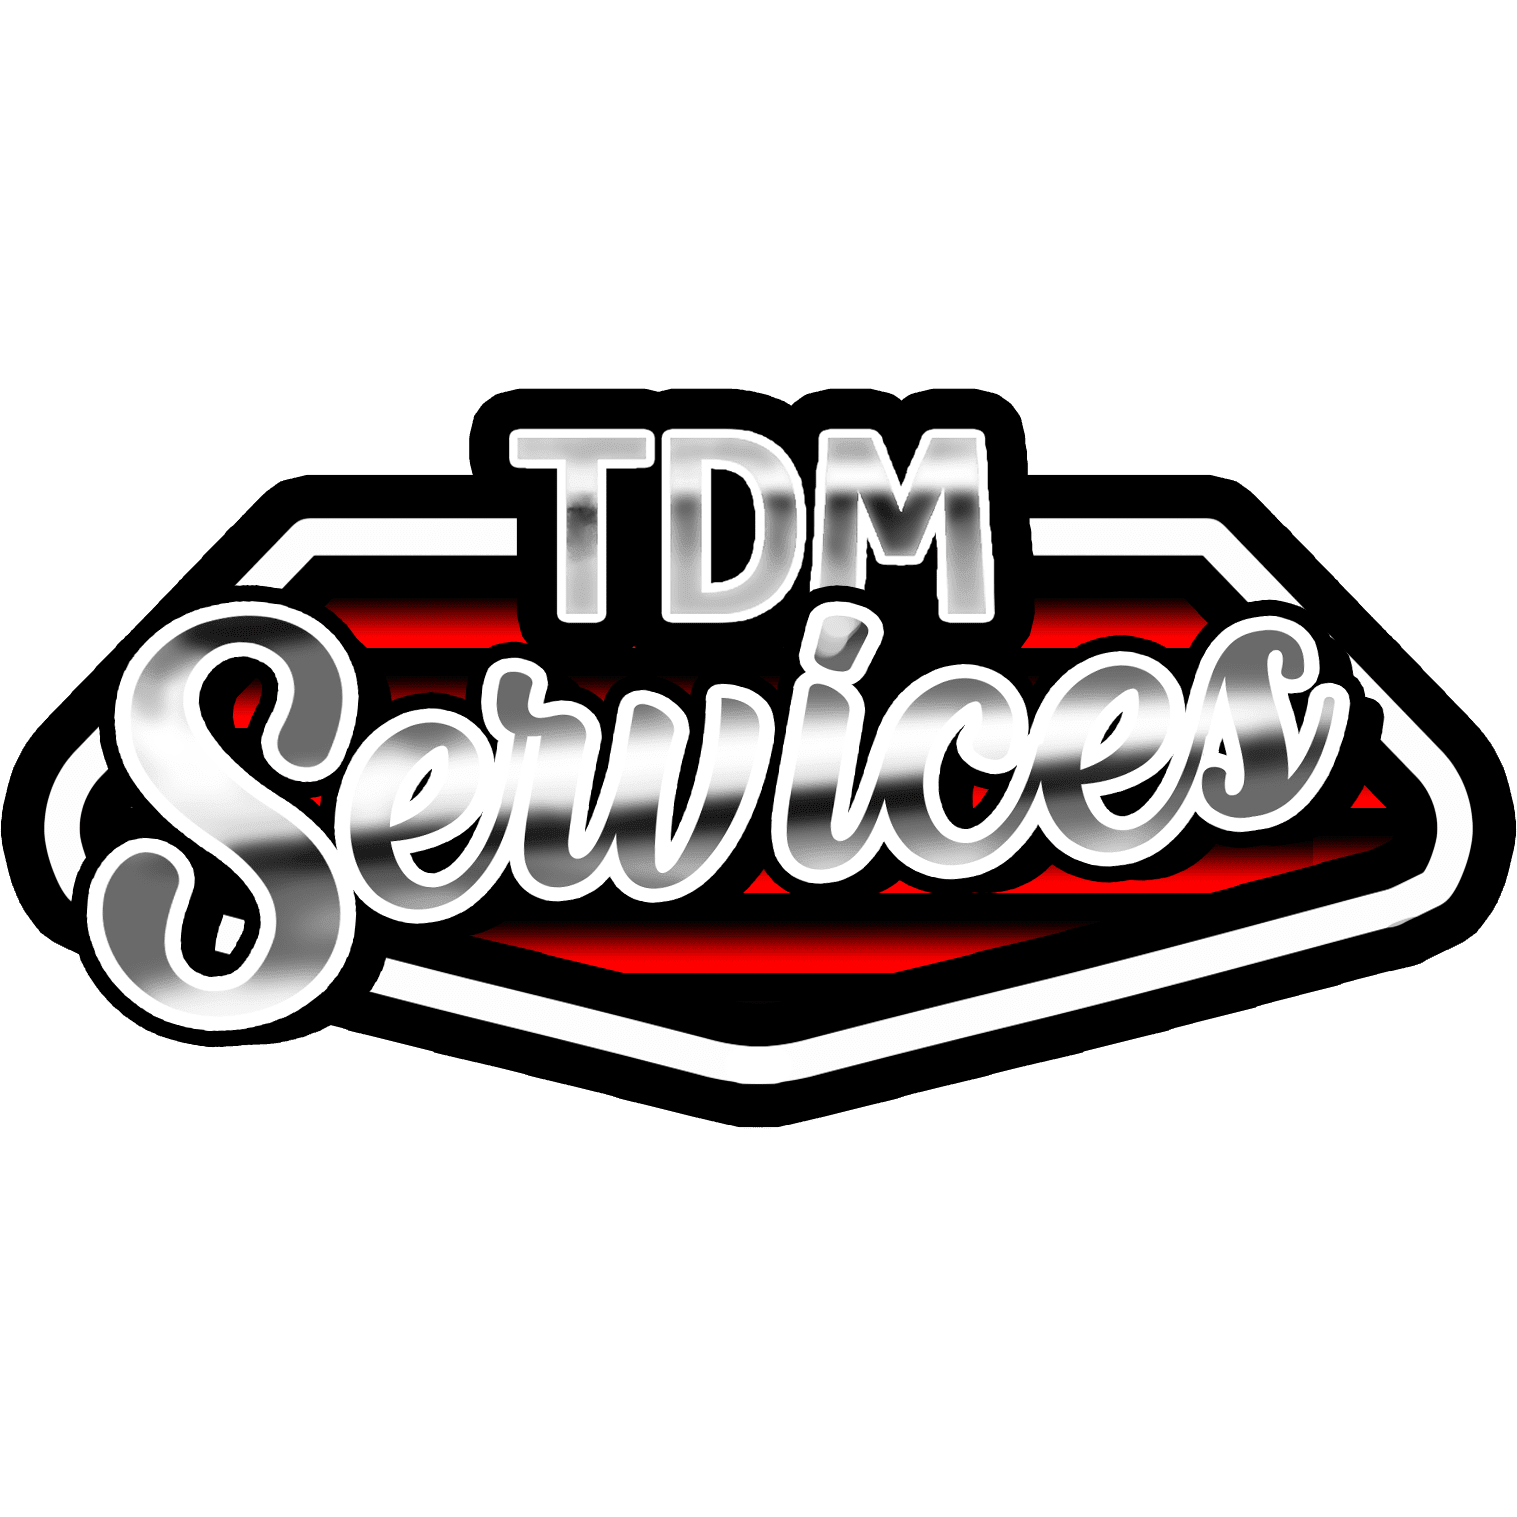 TDM Mechanical Services - Hull, East Riding of Yorkshire HU6 8RD - 01482 425260 | ShowMeLocal.com